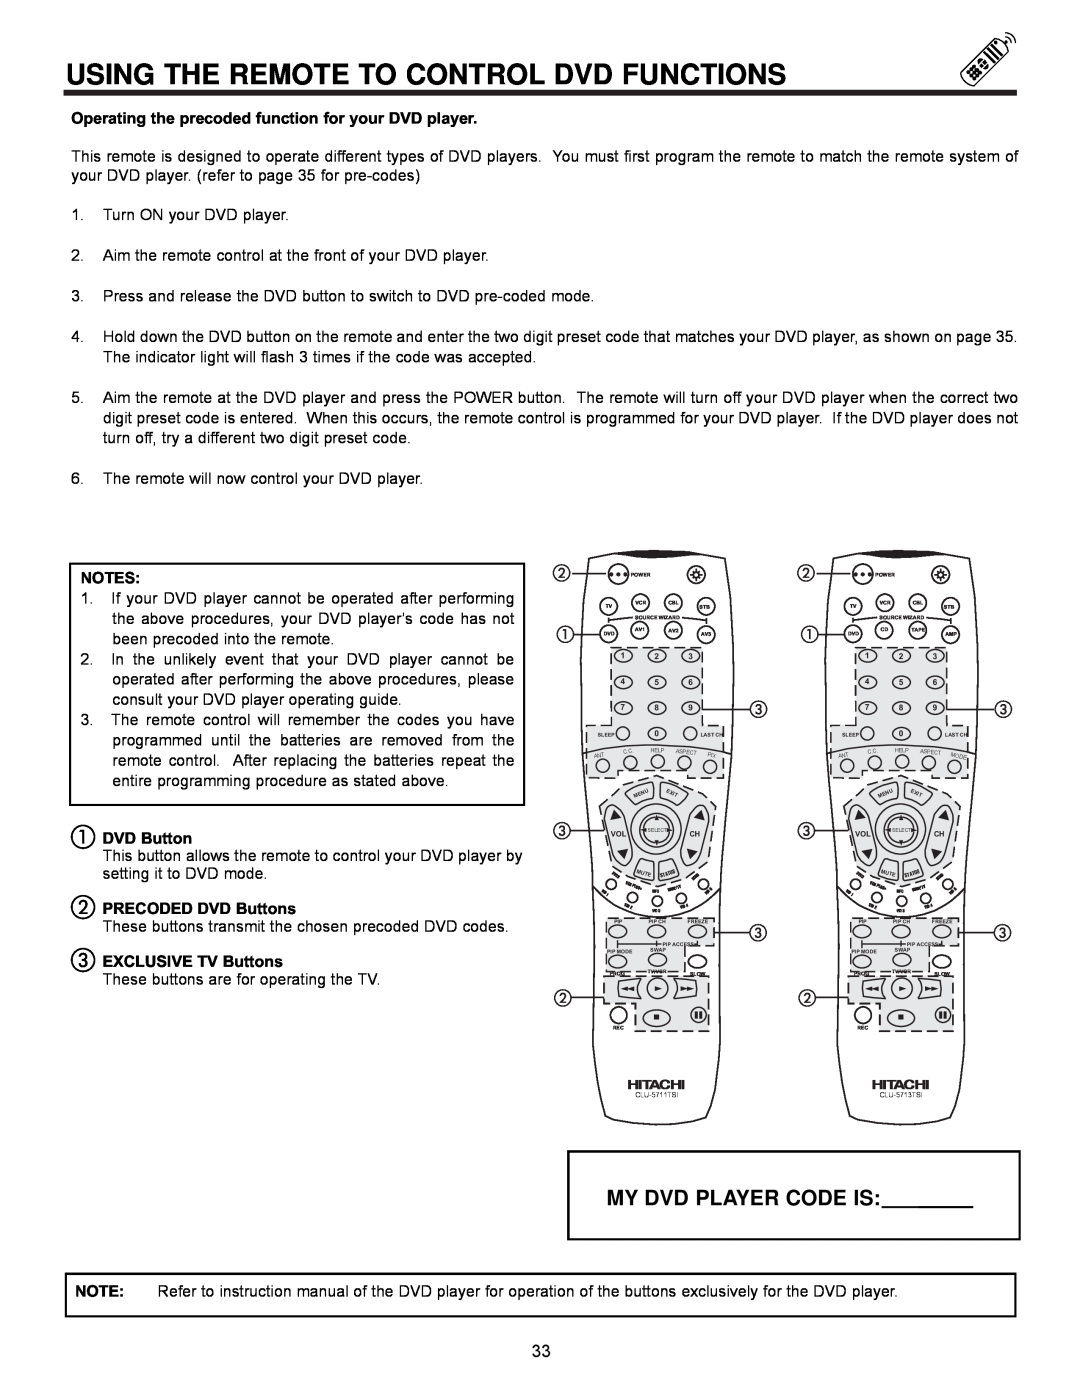 Hitachi 61UWX10B important safety instructions Using The Remote To Control Dvd Functions, My Dvd Player Code Is 